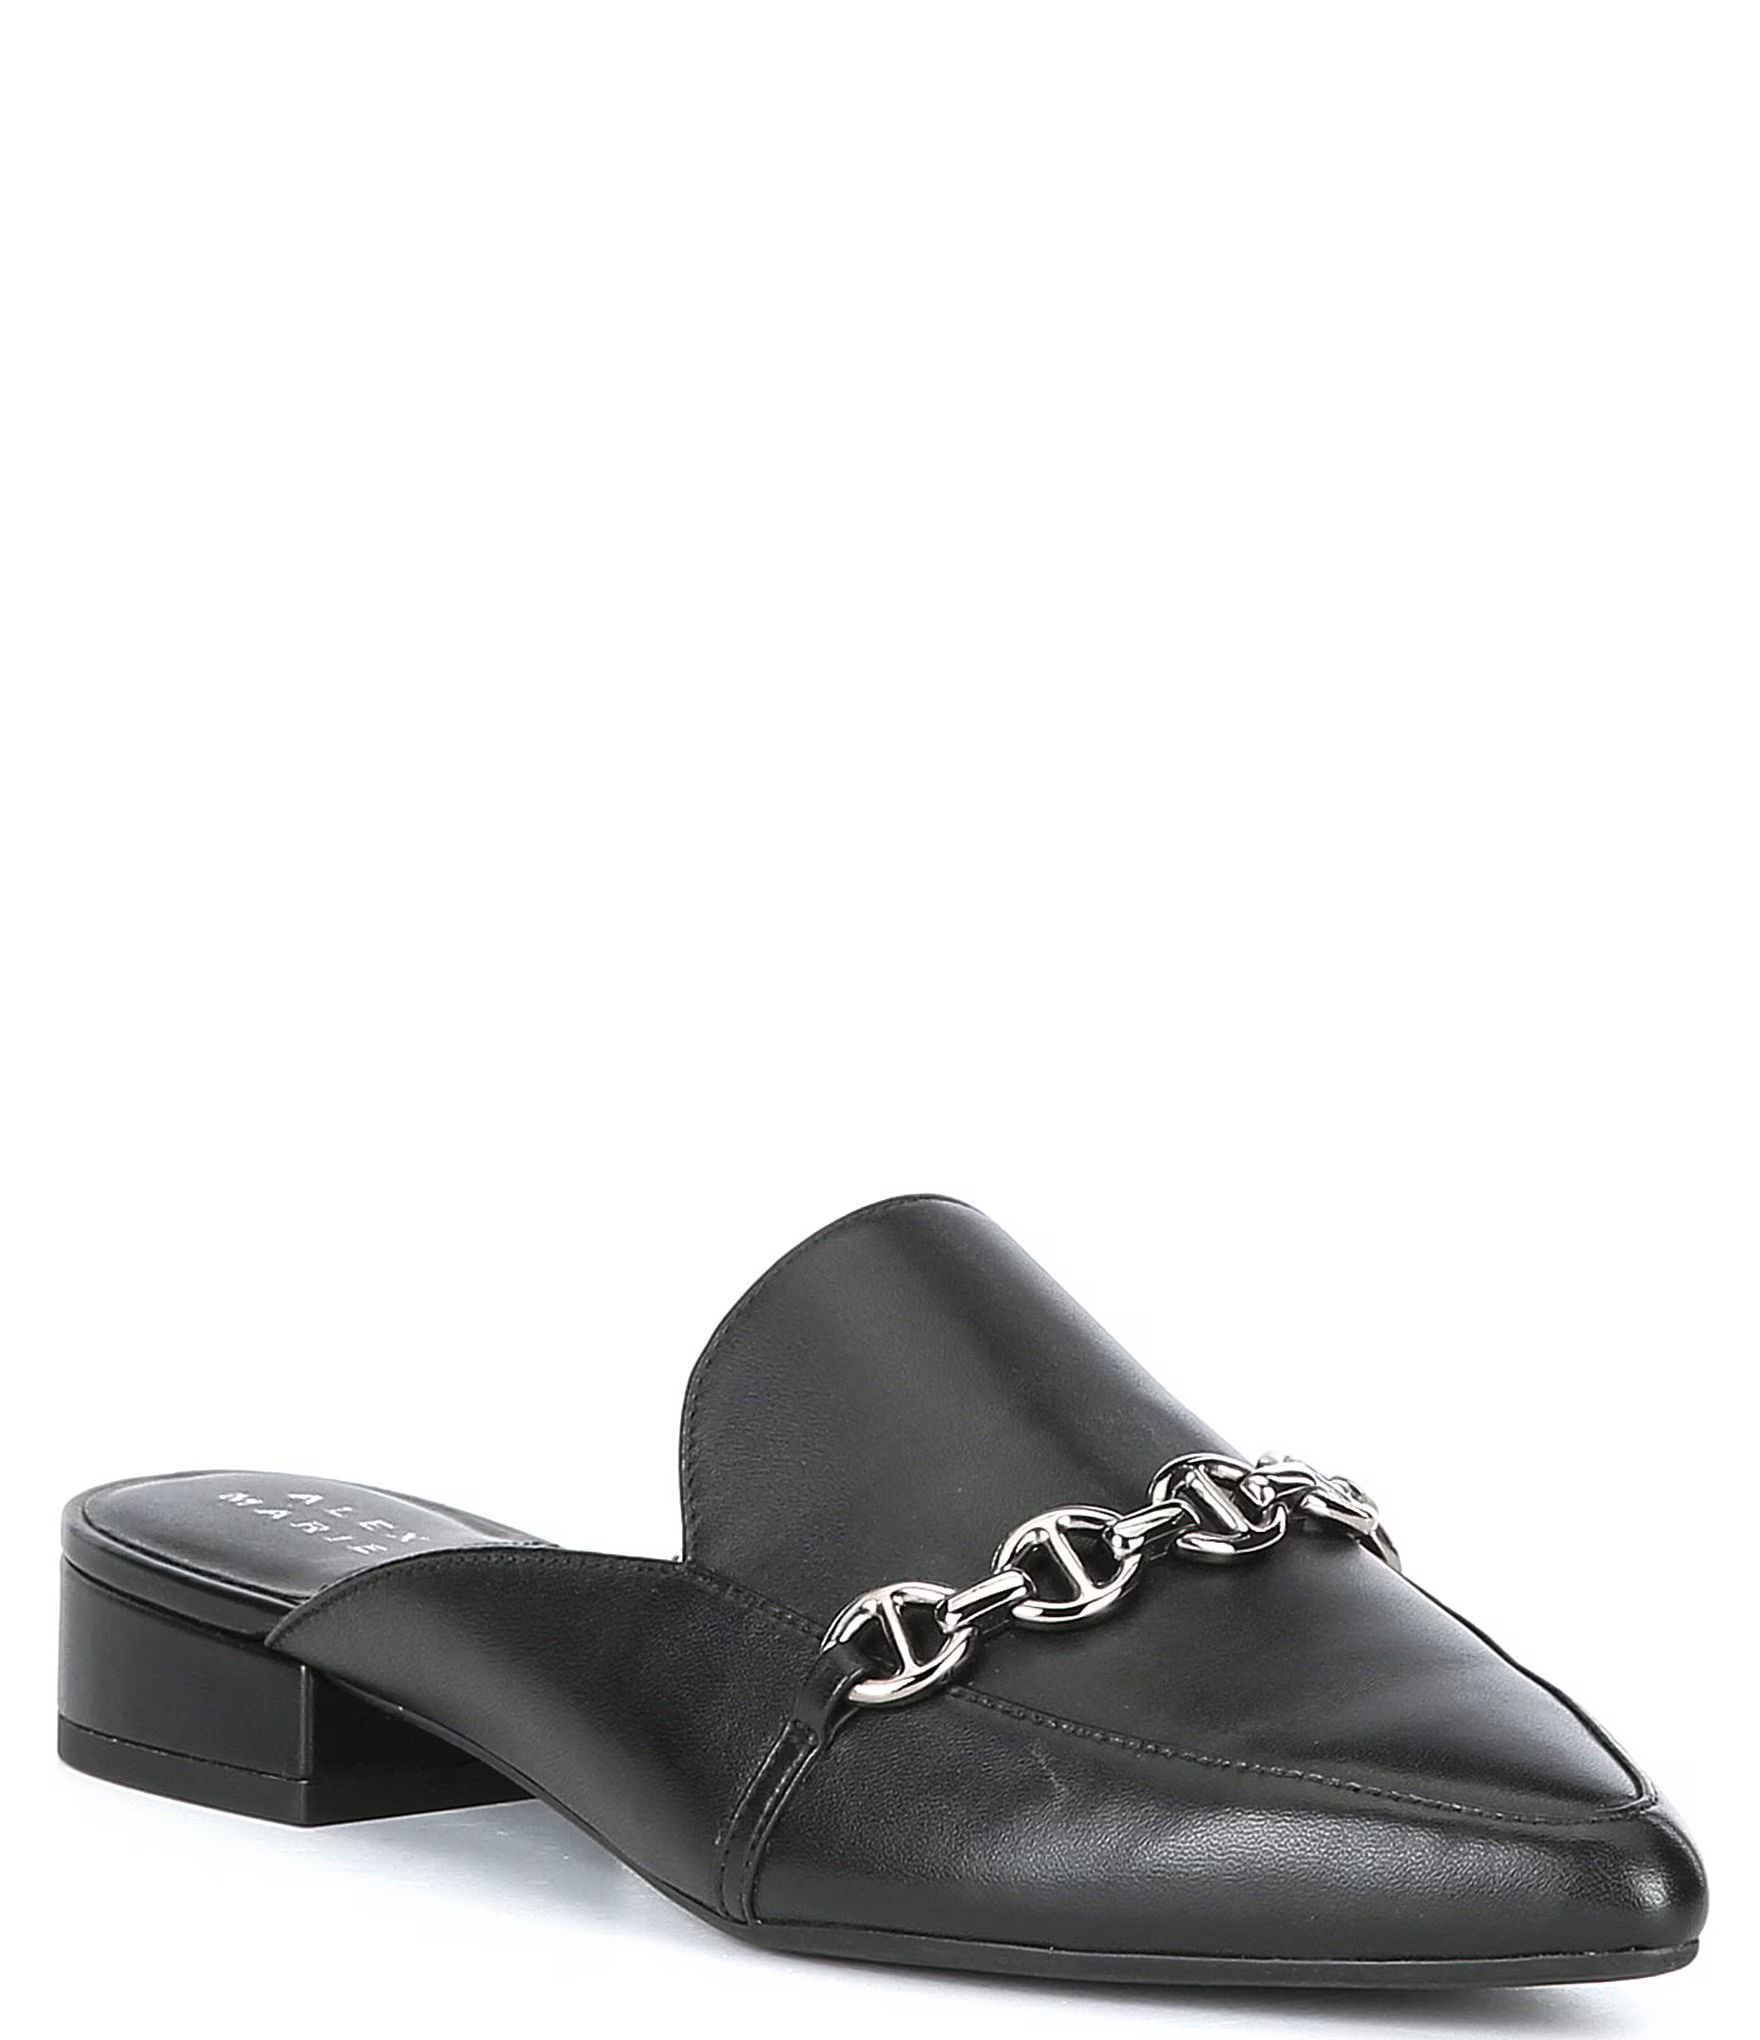 Catricia Leather Chain Detail Point Toe Mules | Dillard's